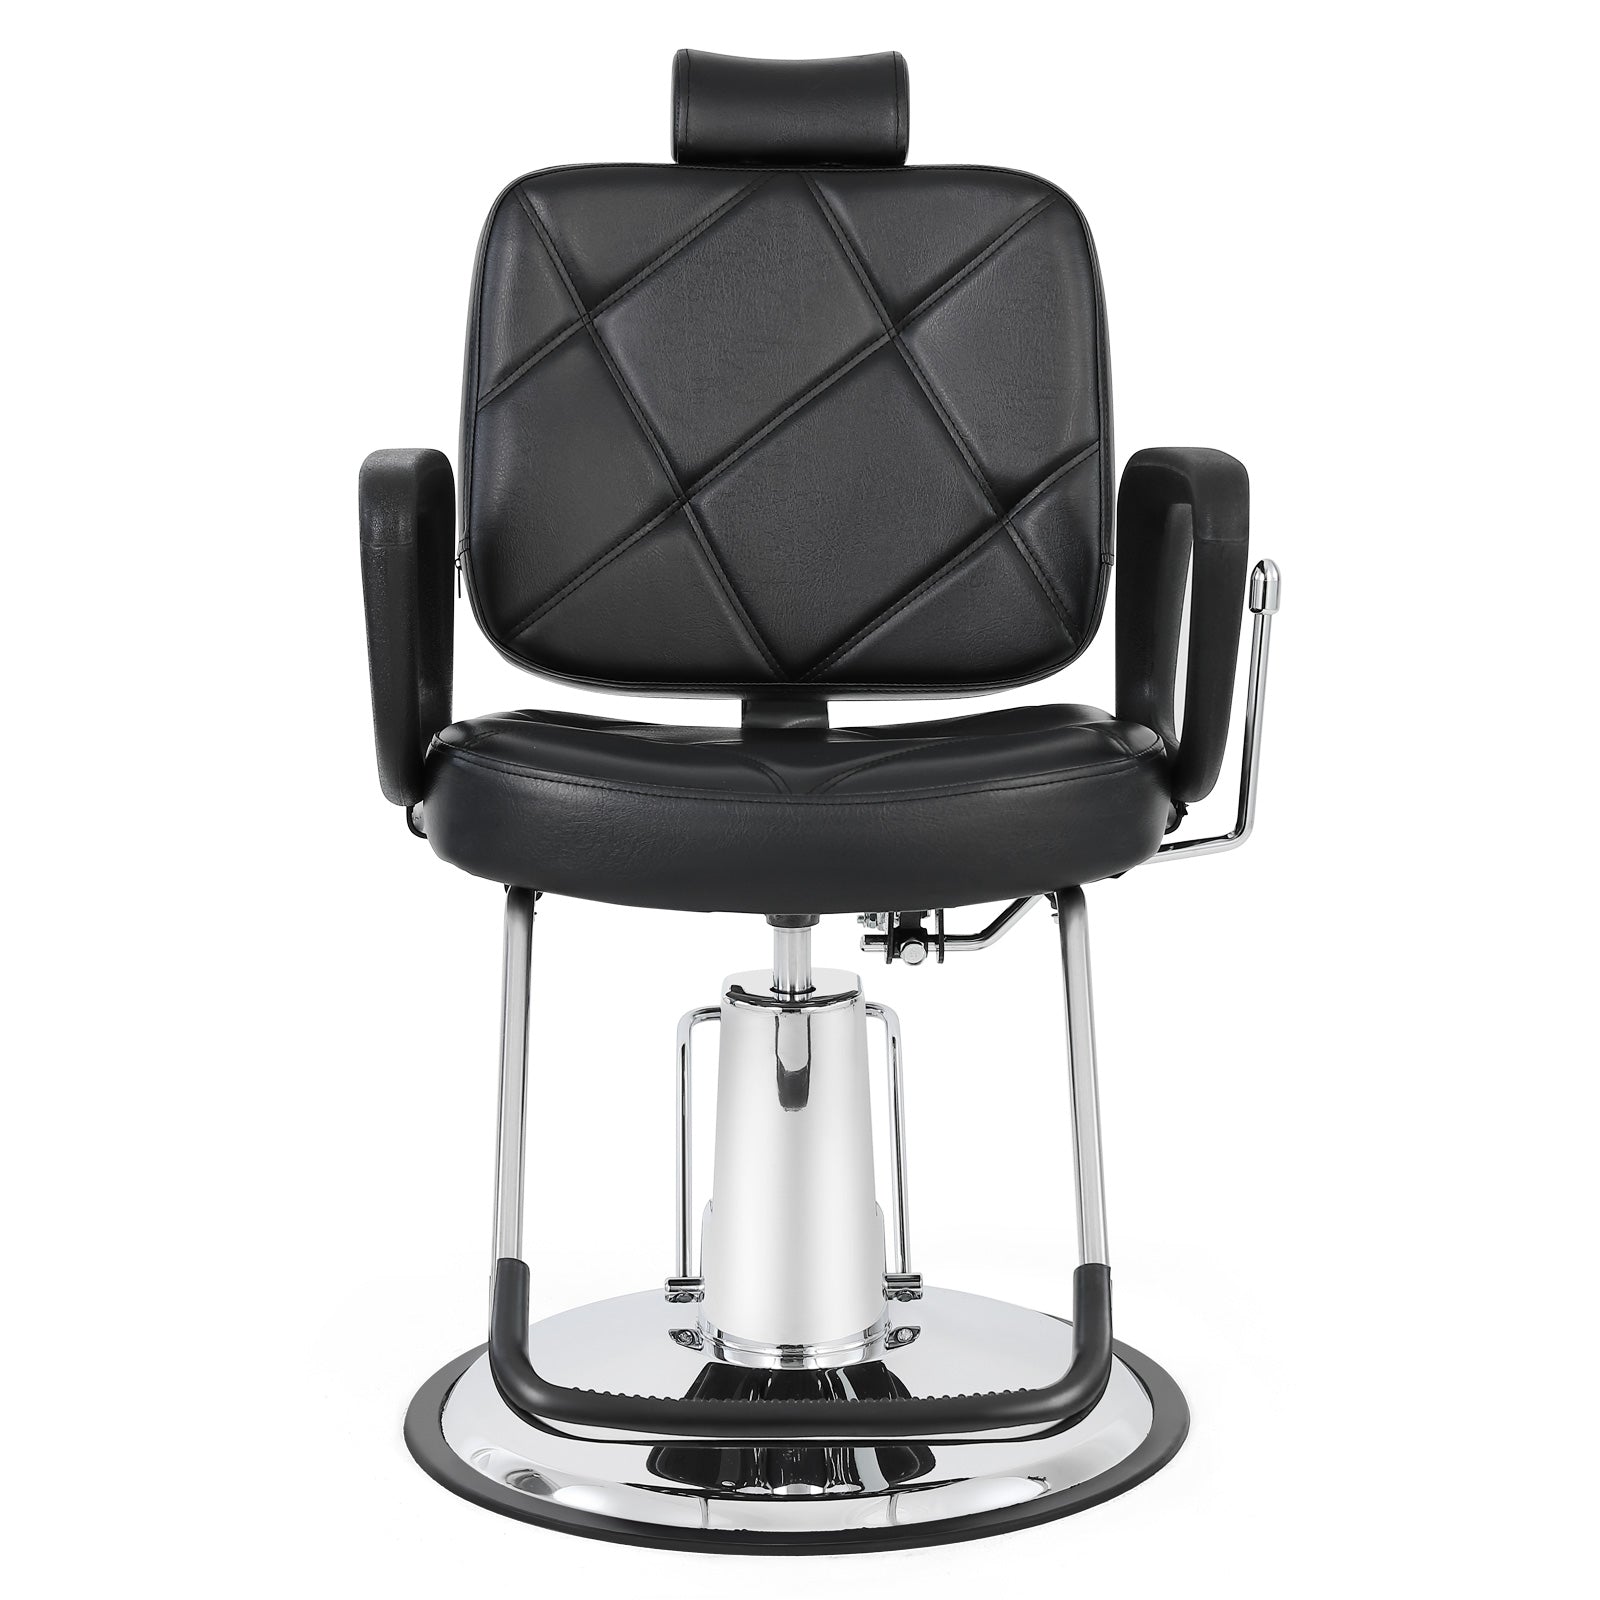 #5003 Hydraulic Recline All purpose Barber Chair Left Handed